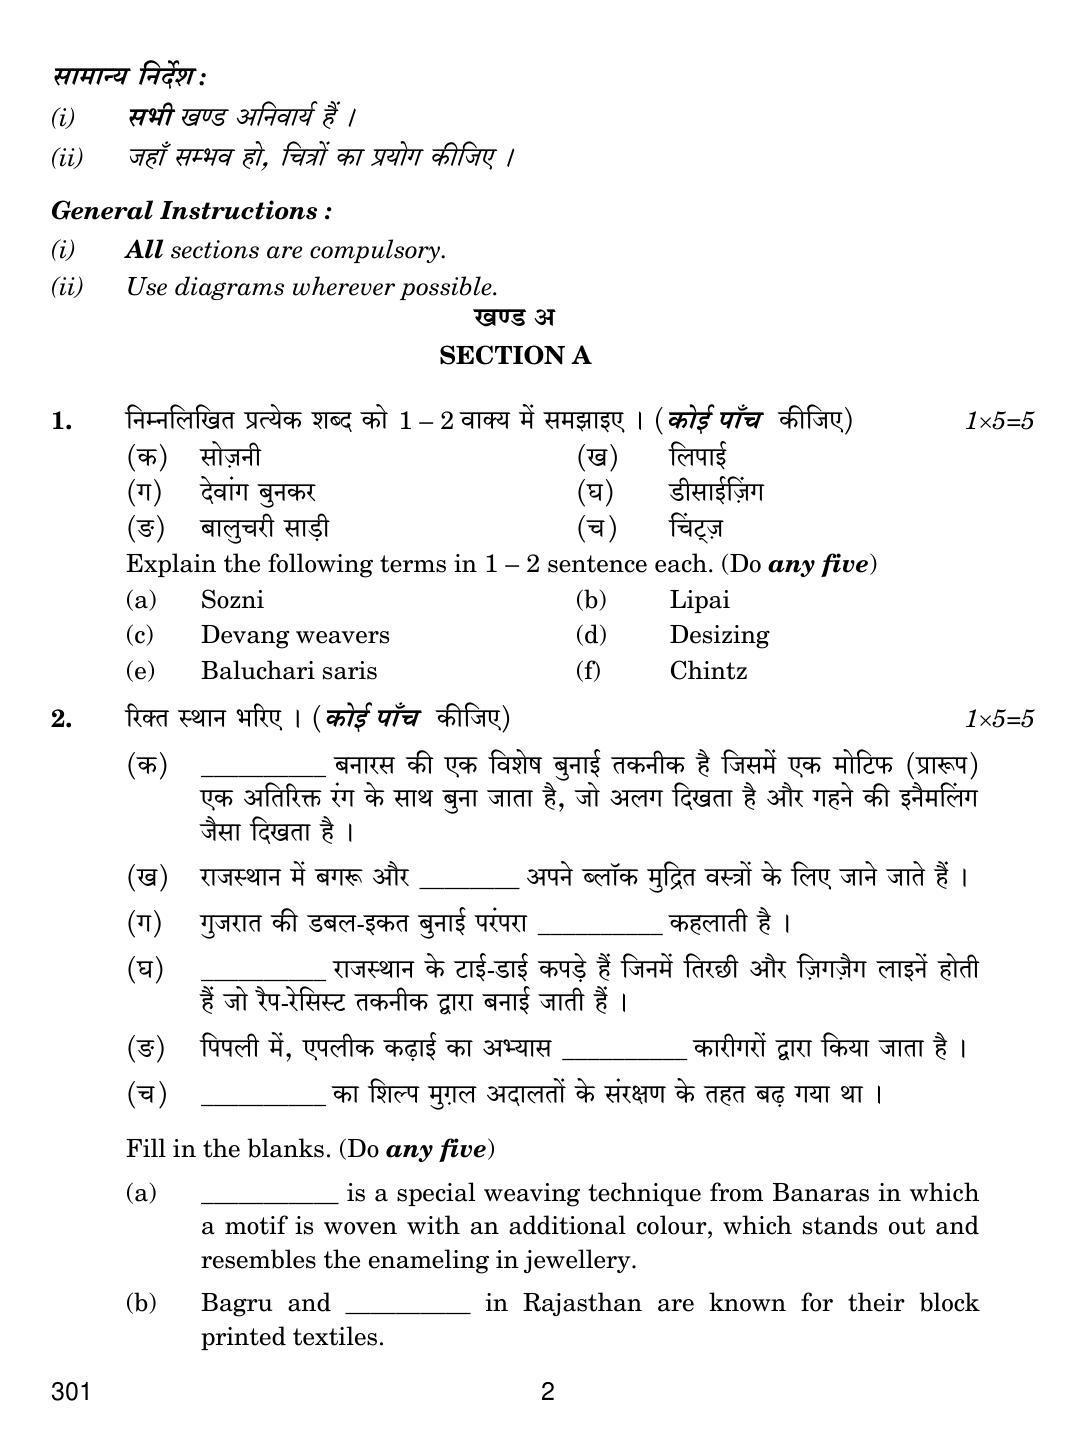 CBSE Class 12 301 Traditional Indian Textiles 2019 Question Paper - Page 2